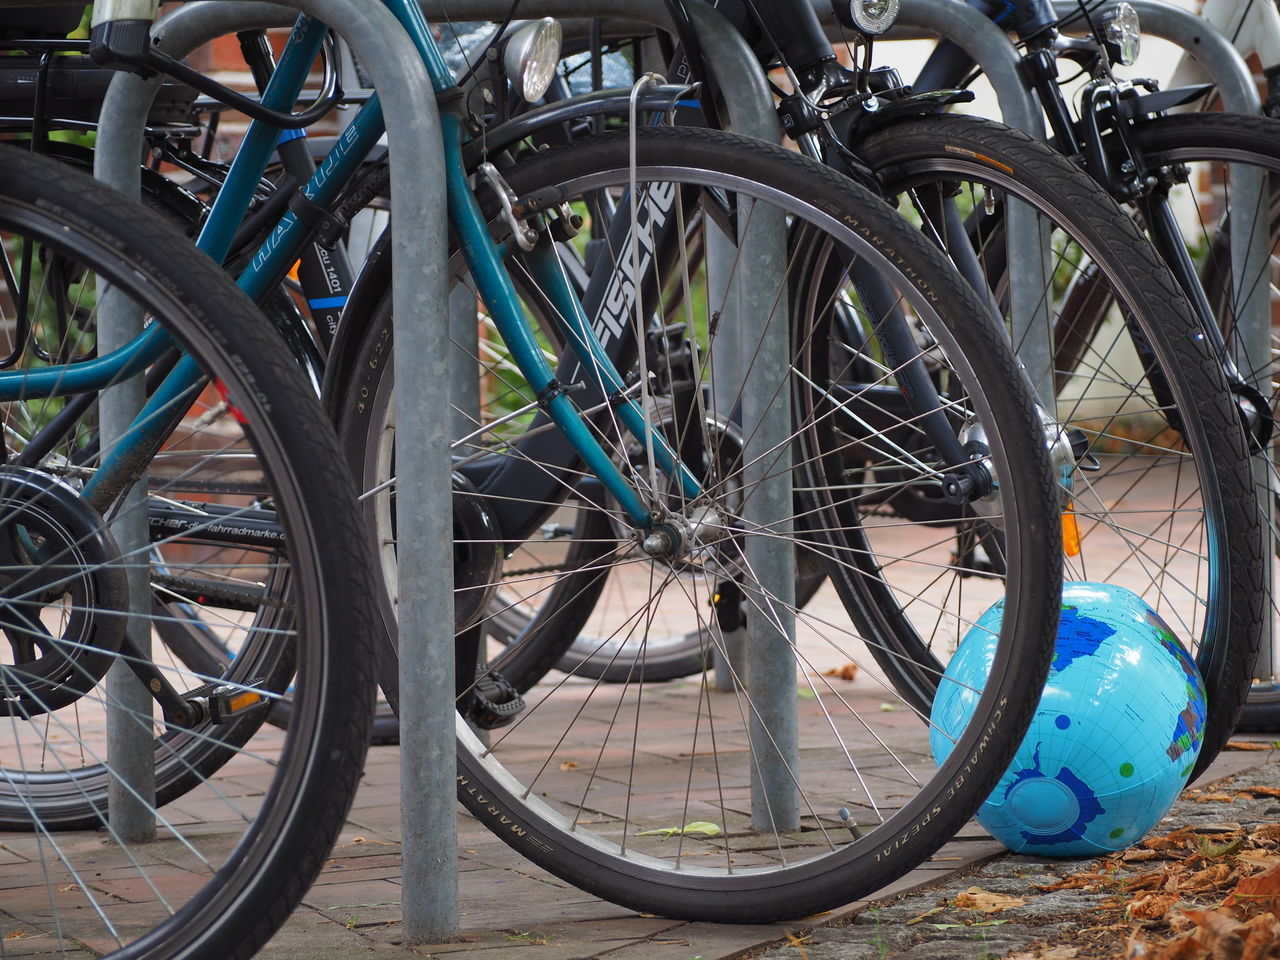 CLOSE-UP OF BICYCLE PARKED ON PARKING LOT